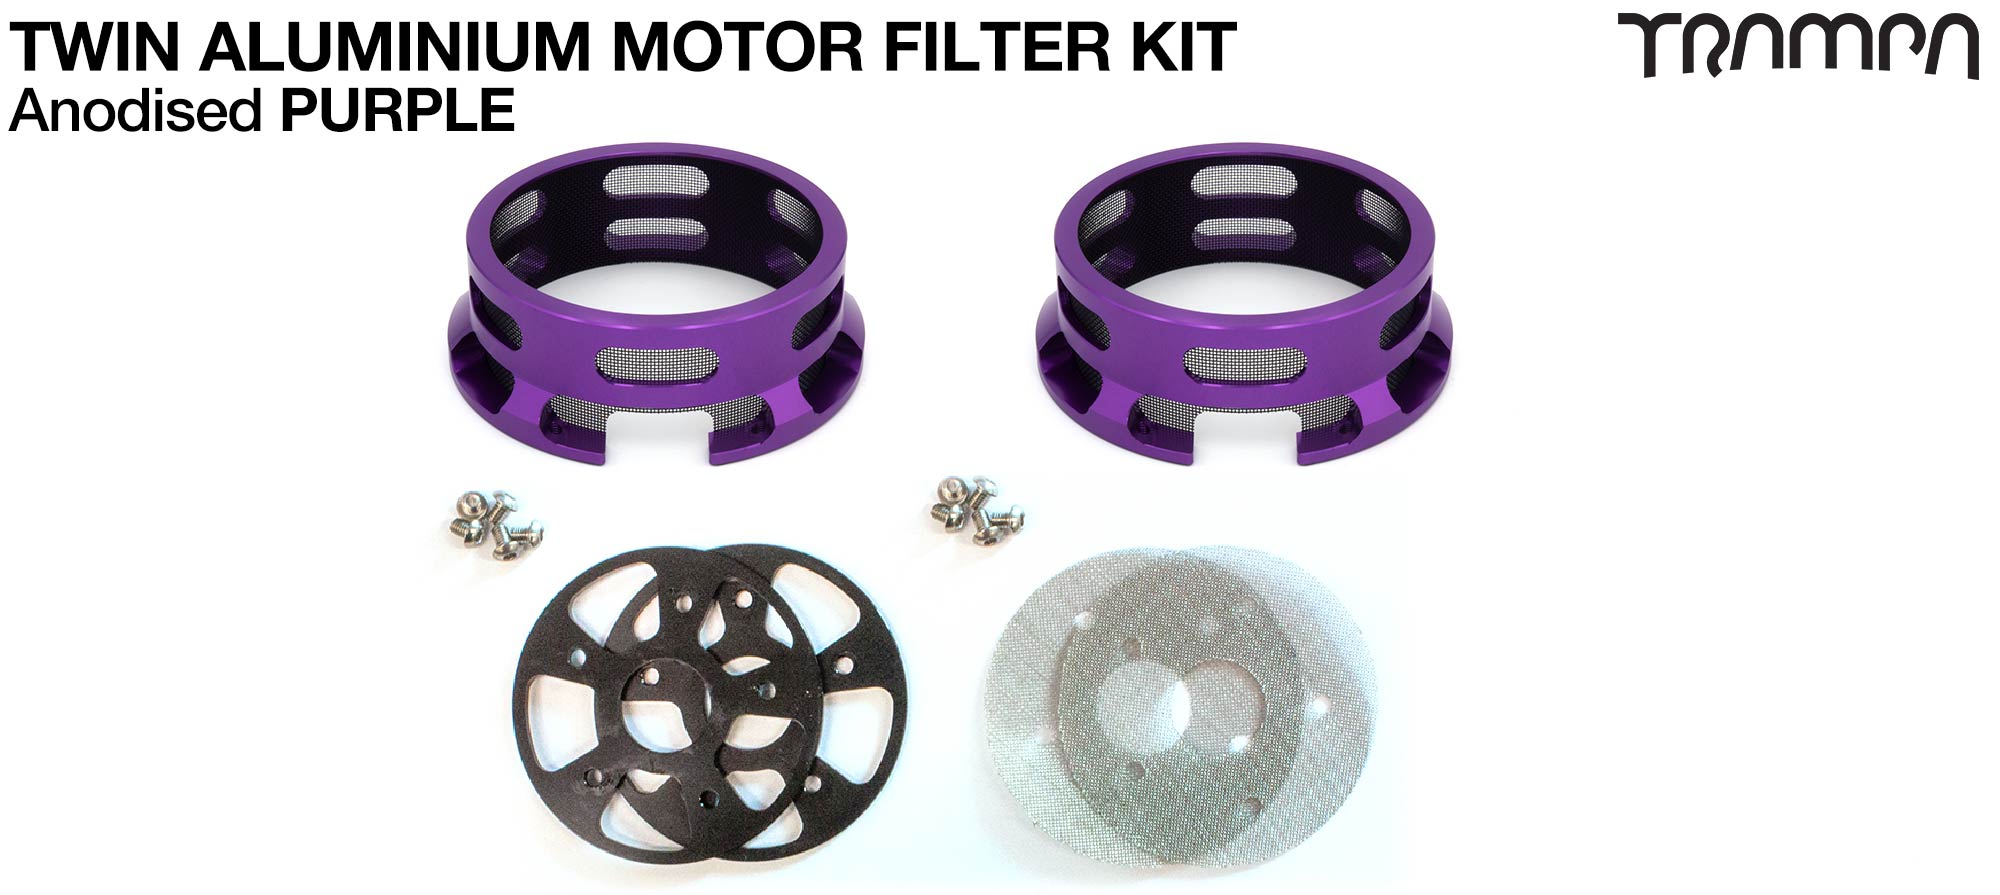 HALF CAGE Motor protection  - PURPLE anodised with Filter & Fan - TWIN